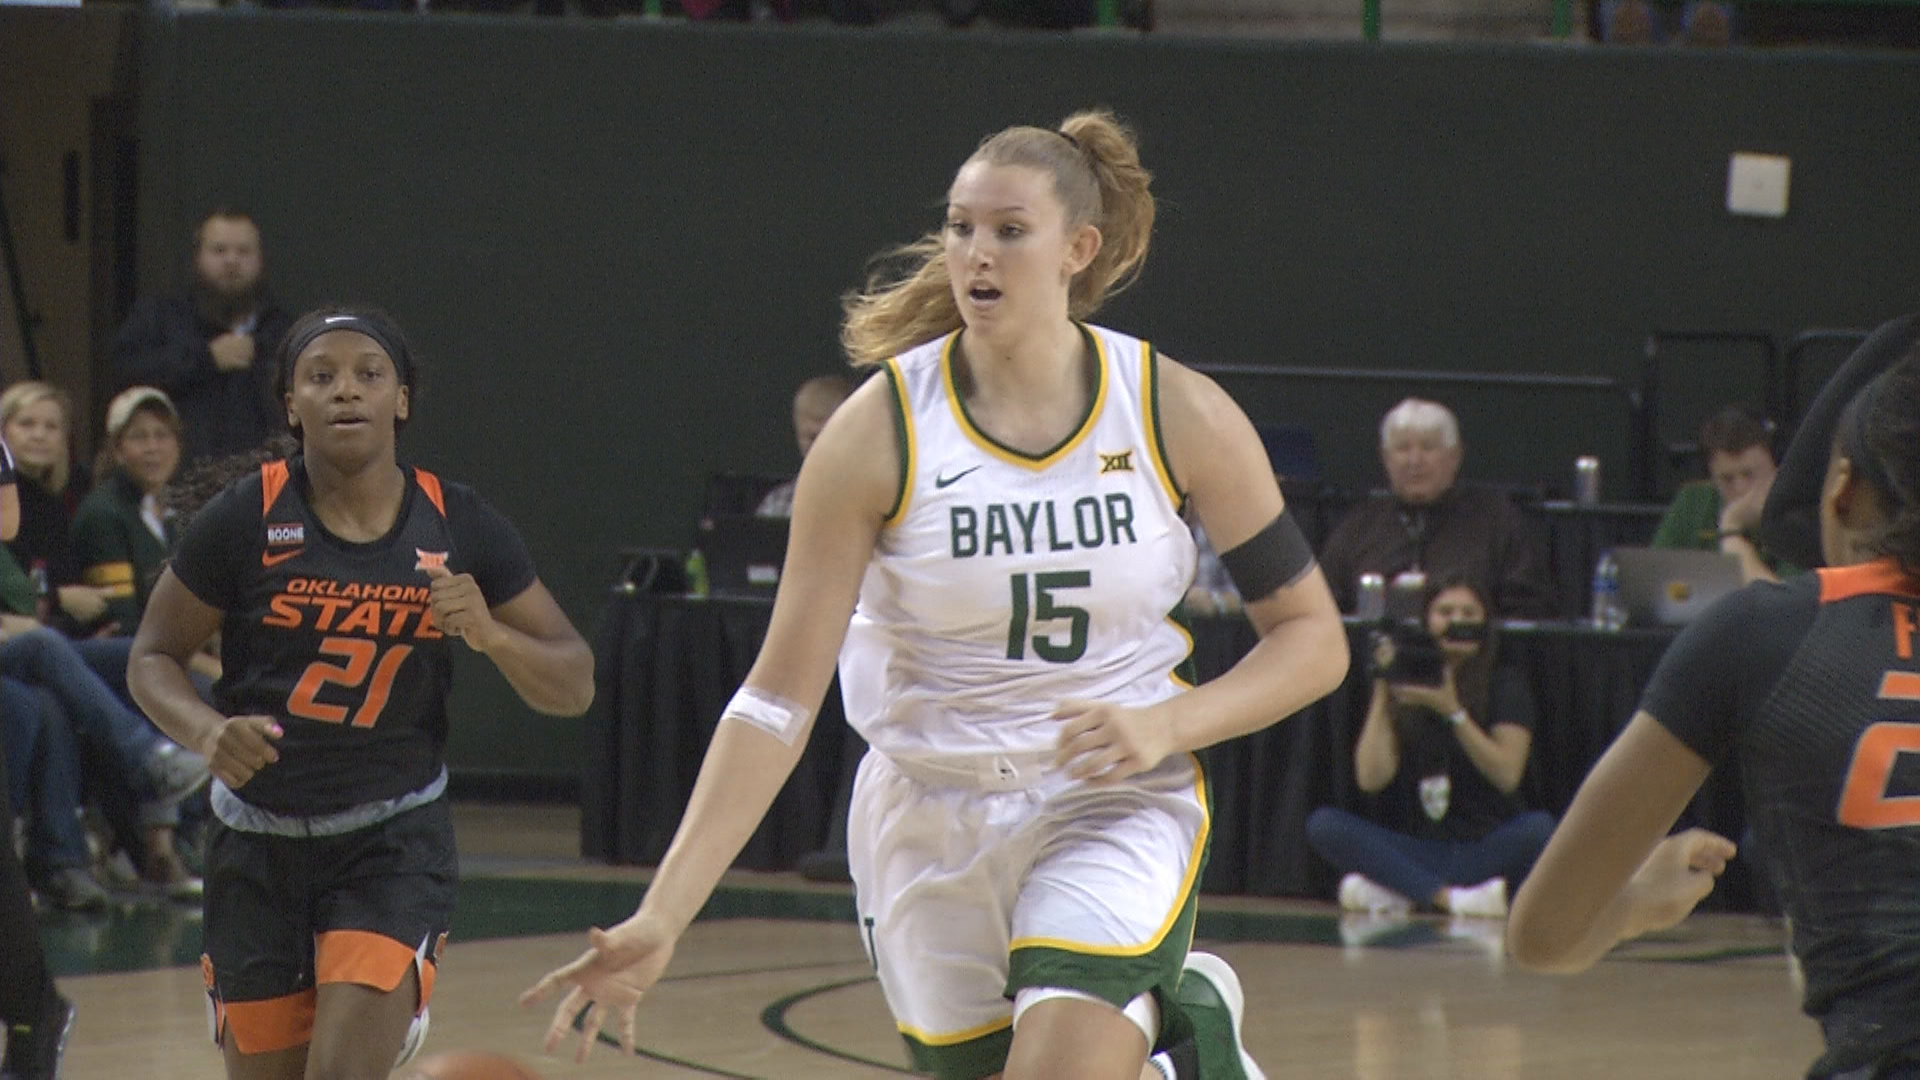 The Lady Bears moved Lauren Cox, normally a post, to a guard spot as part of a bigger lineup.